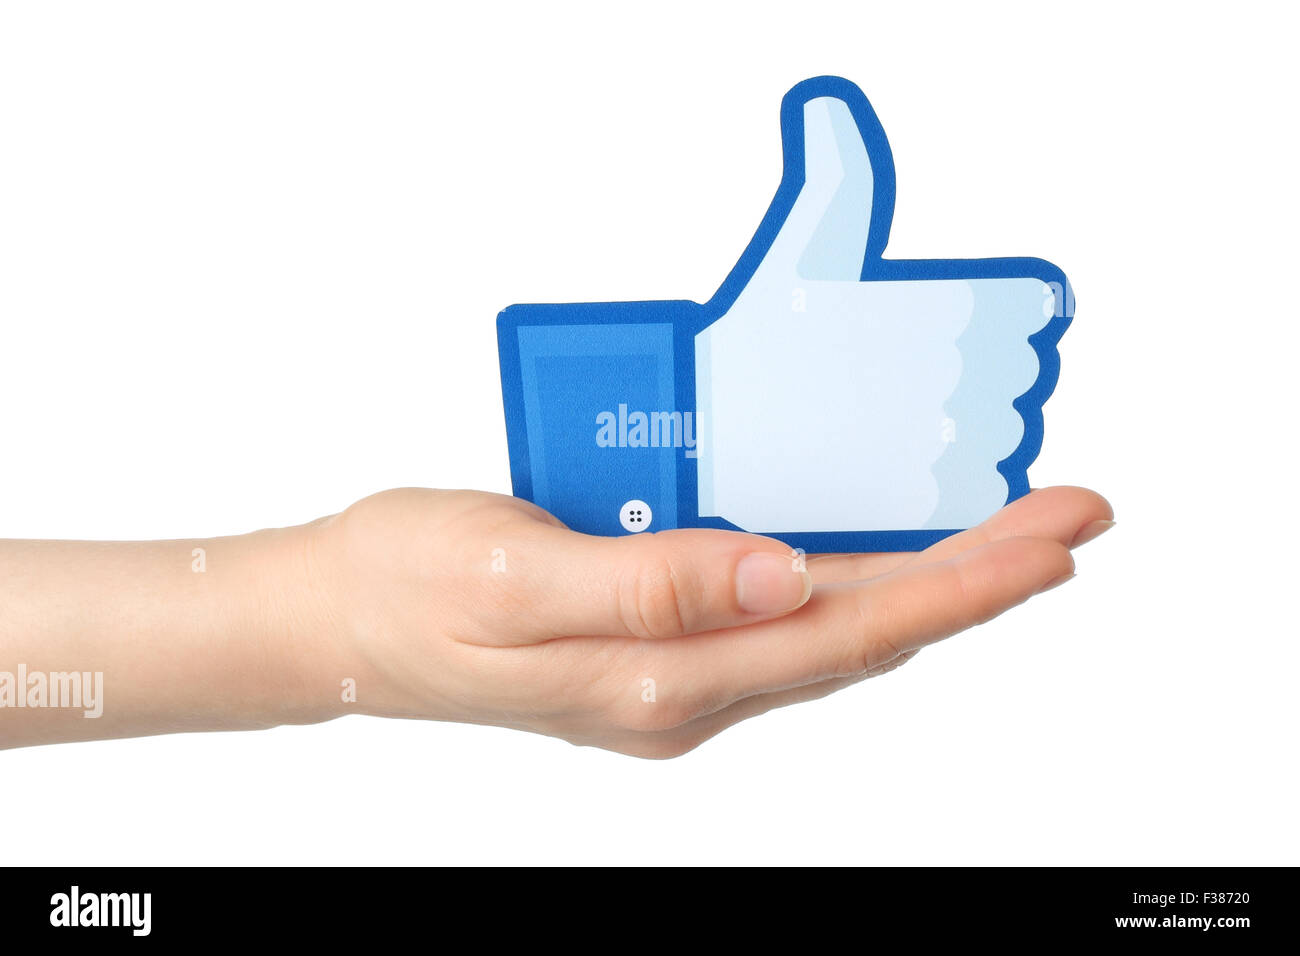 KIEV, UKRAINE - JANUARY 24, 2015: Hand holds facebook thumbs up sign printed on paper on white background. Stock Photo